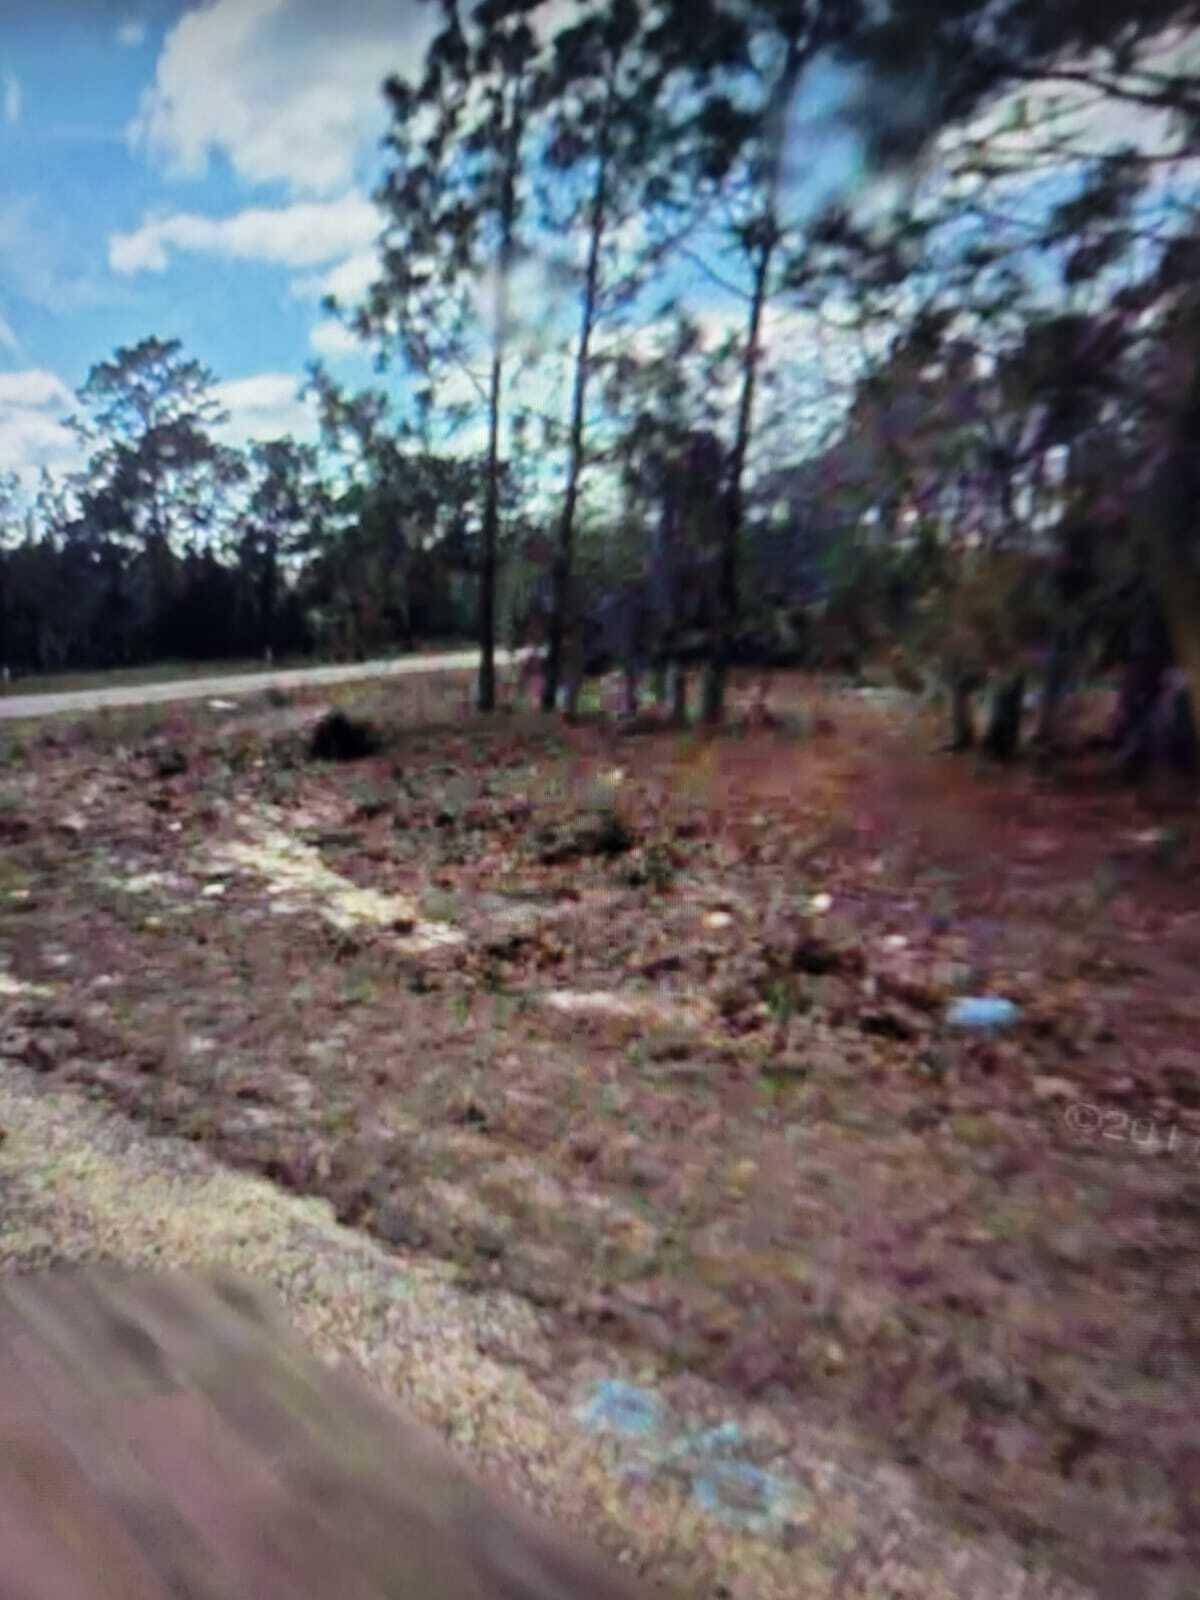 Build your dream home on this nice wooded lot in the community of Citrus Springs.